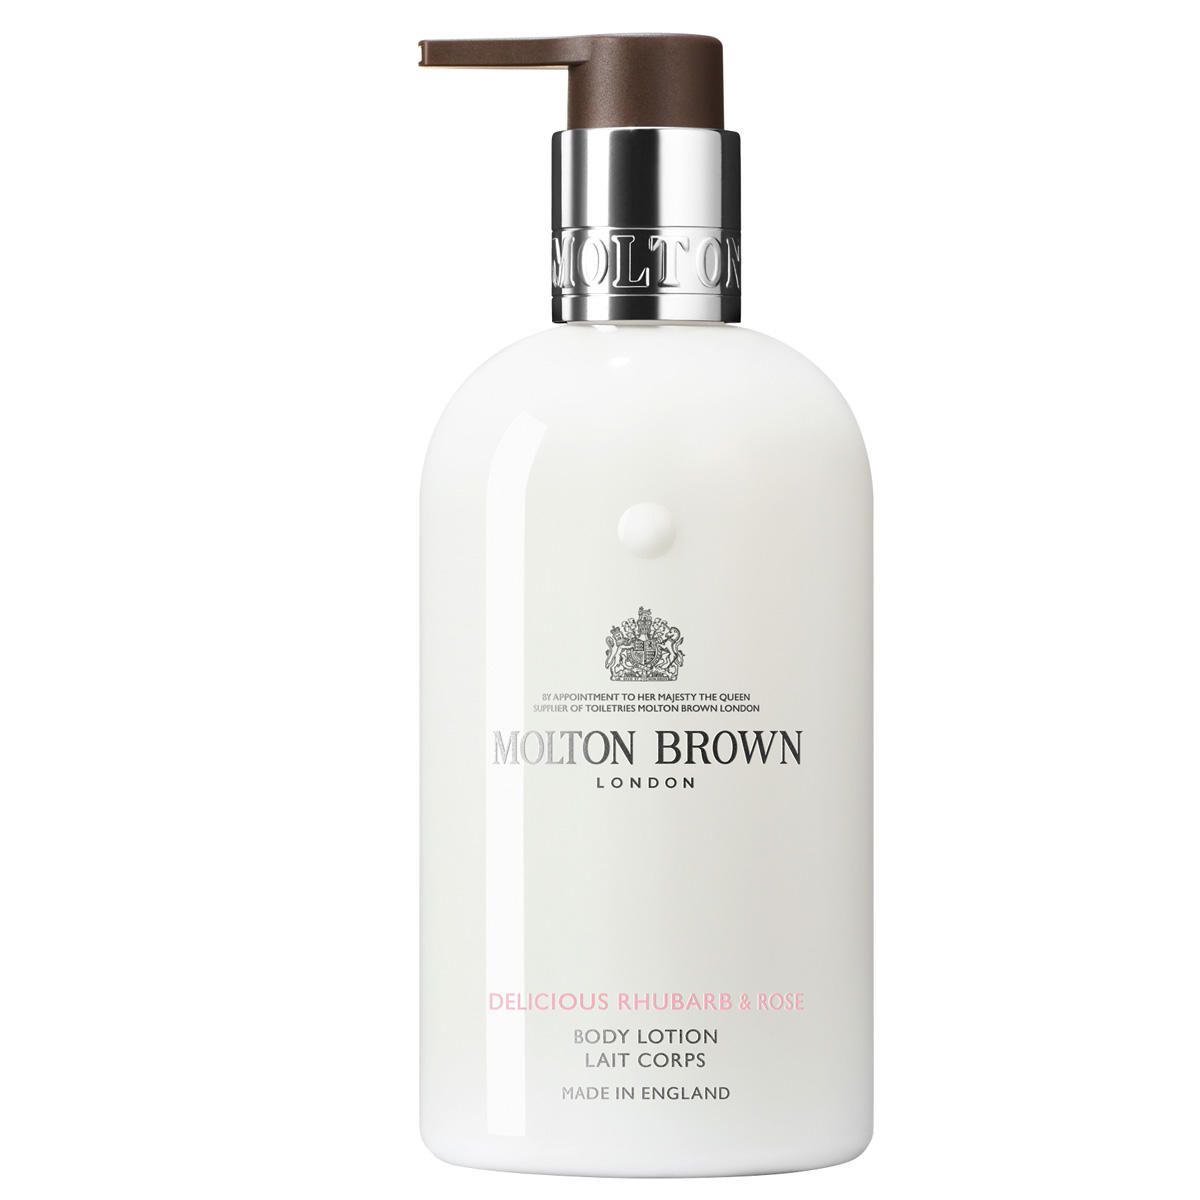 MOLTON BROWN Delicious Rhubarb & Rose Body Lotion 300 ml - 1